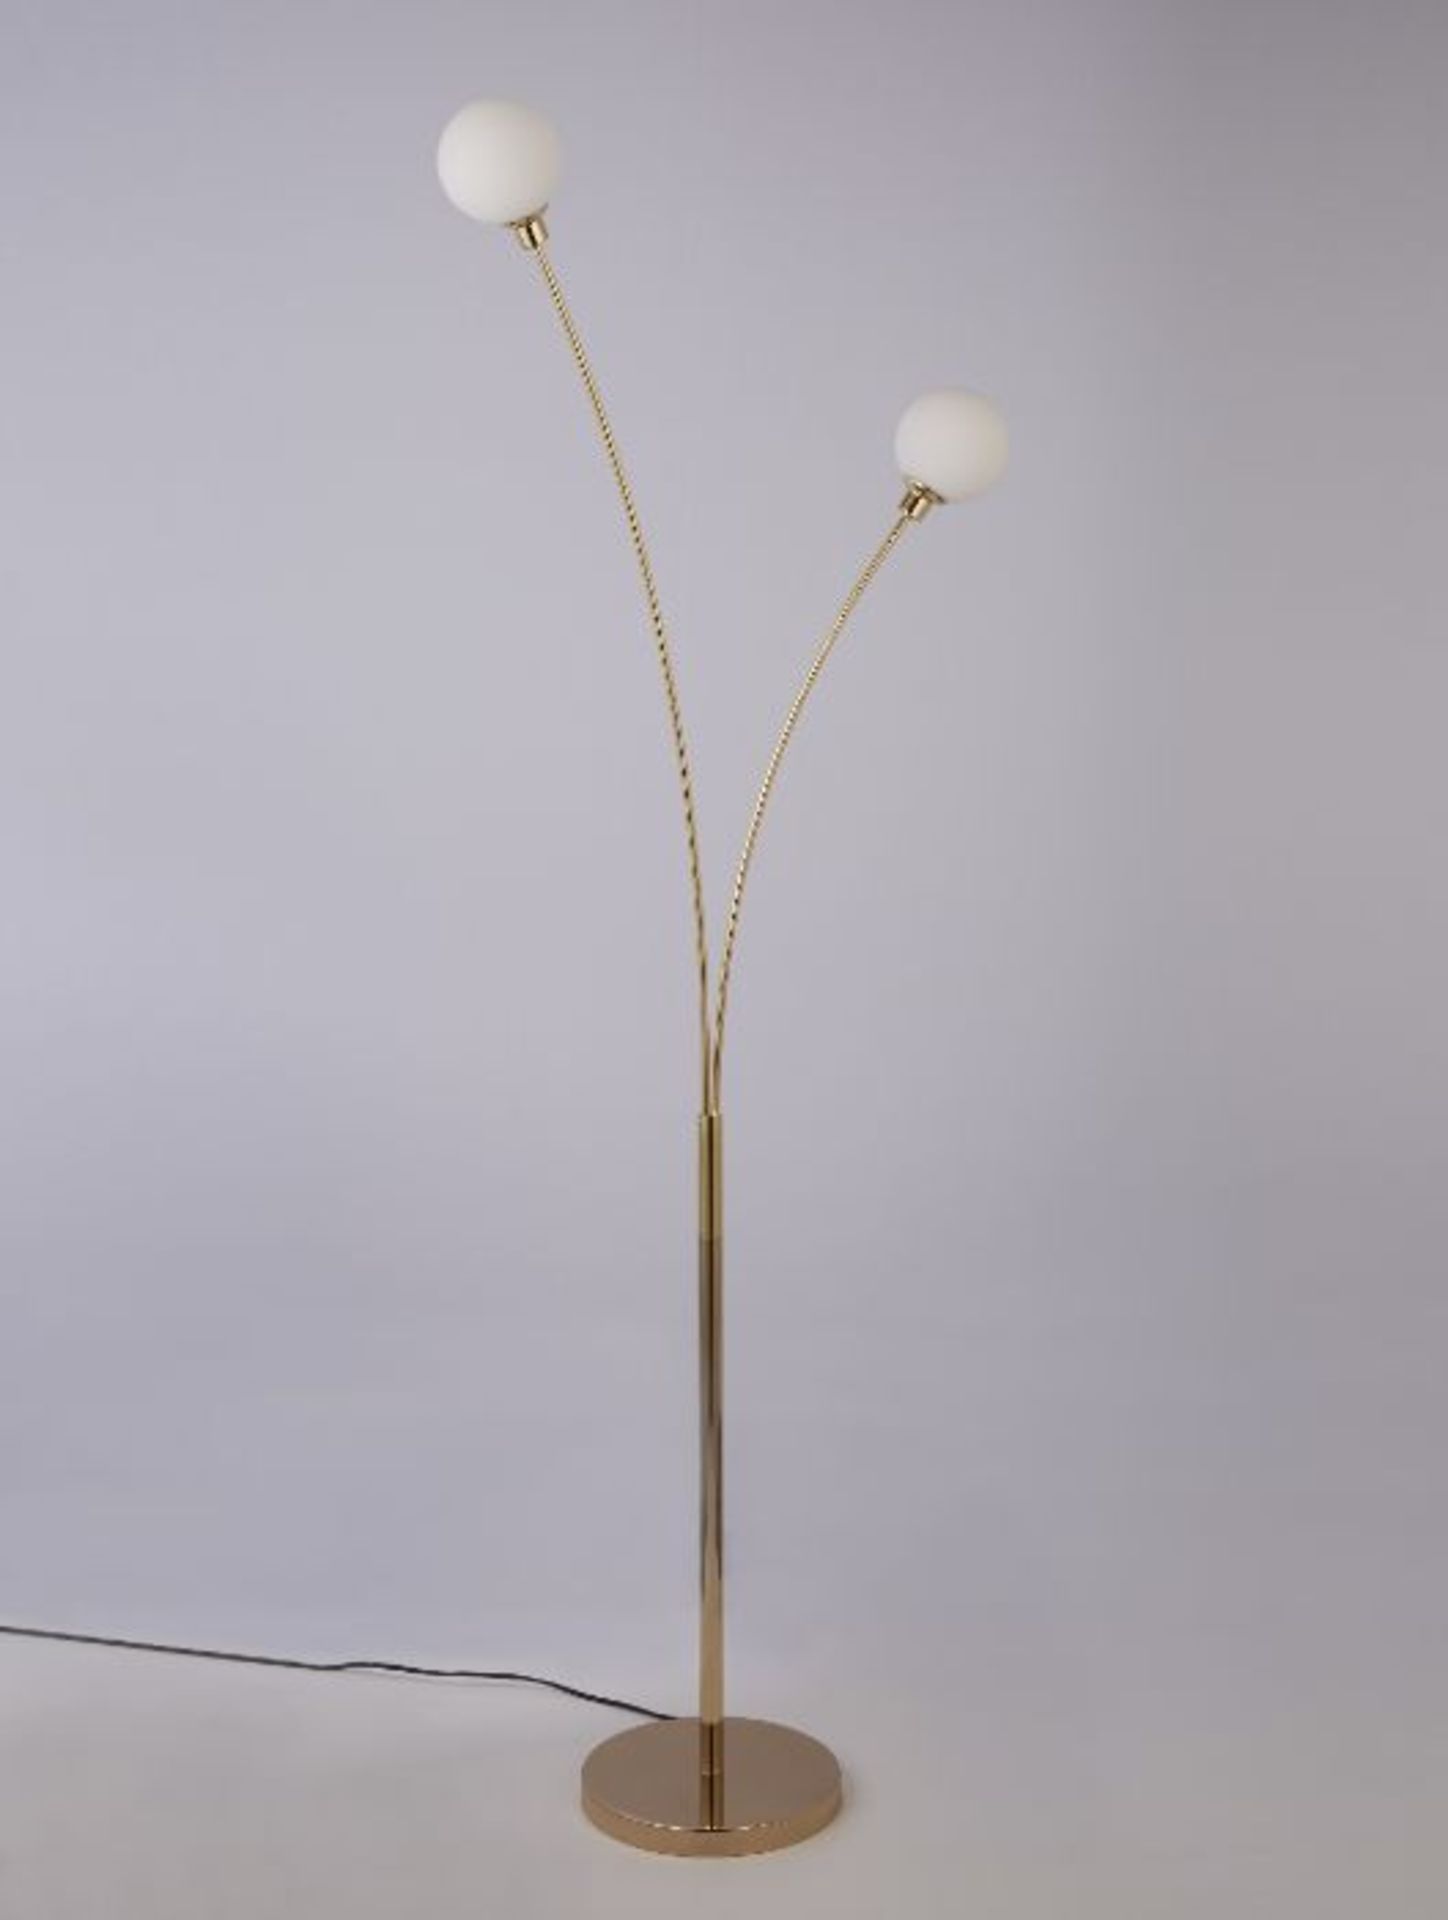 GOLD METAL LED FLOOR LAMP WITH WHITE GLASS ORB SHADES. 151CM TALL. 3W. - Gold floor lamp with